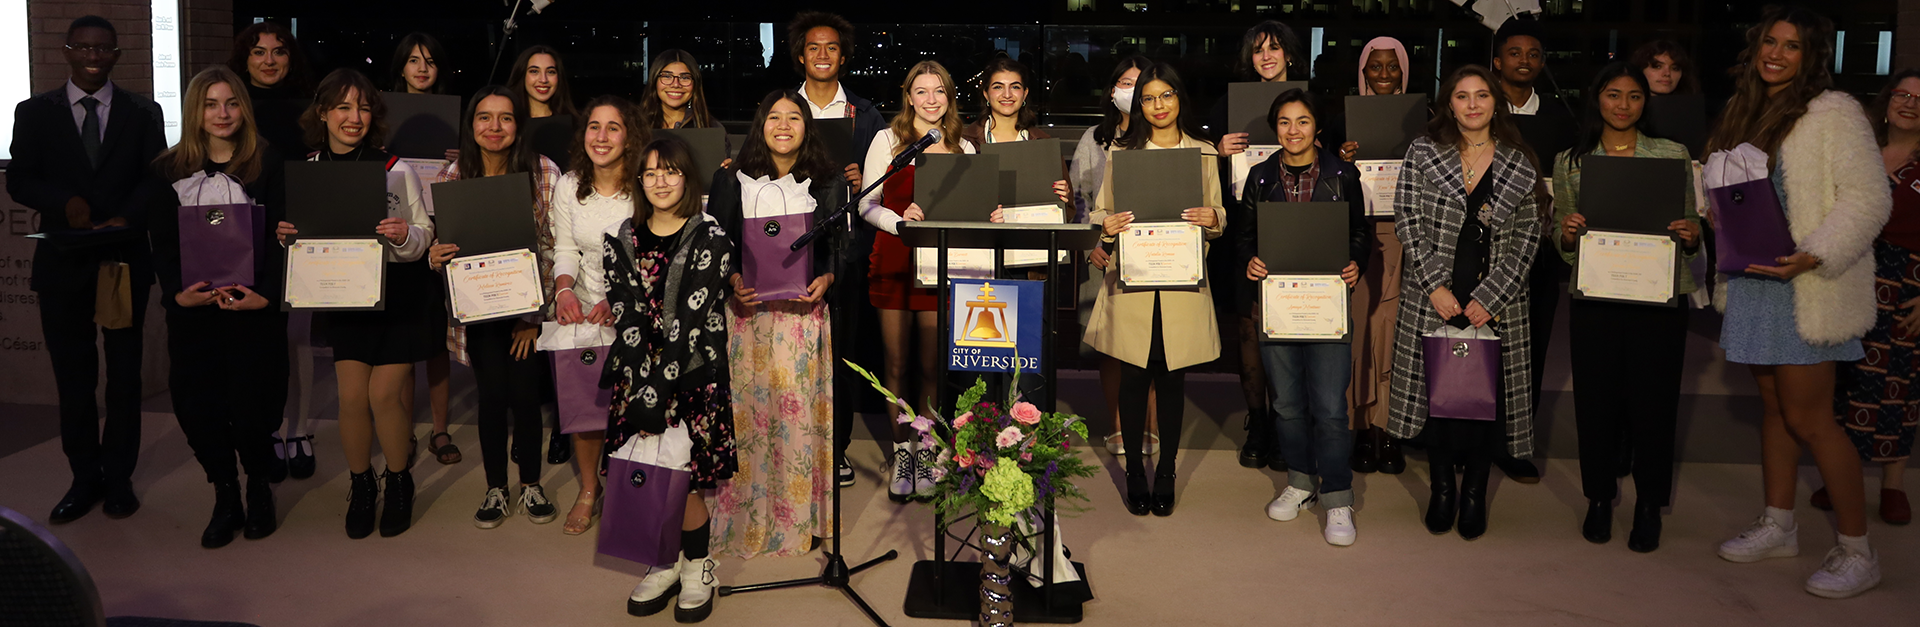 Teen Poet Laureate finalists pose with honors at formal event